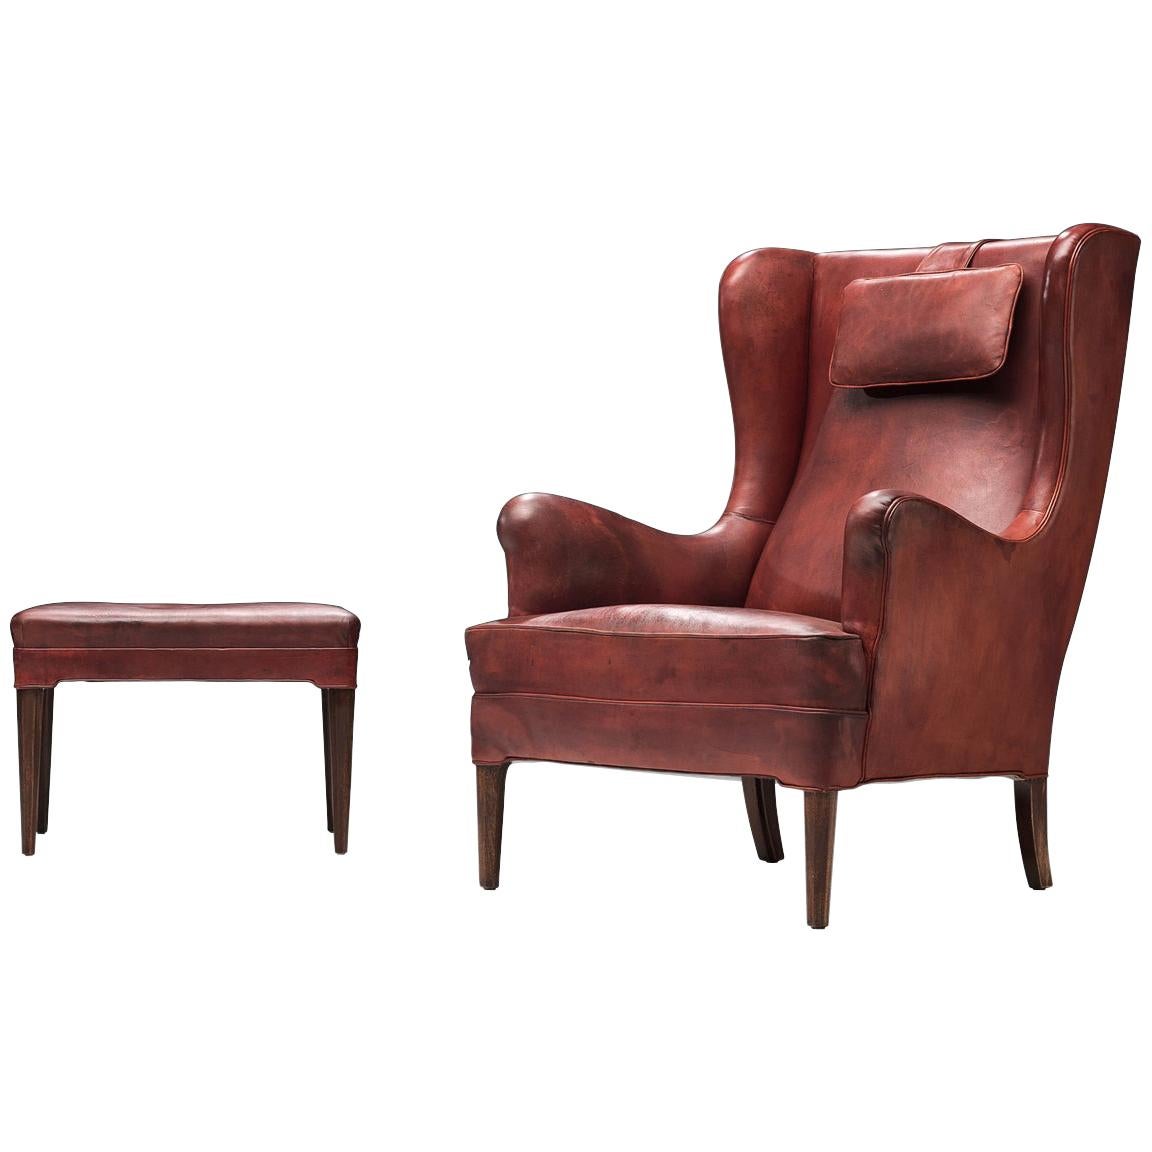 Frits Heningsen Lounge Chair with Ottoman in Original Burgundy Leather